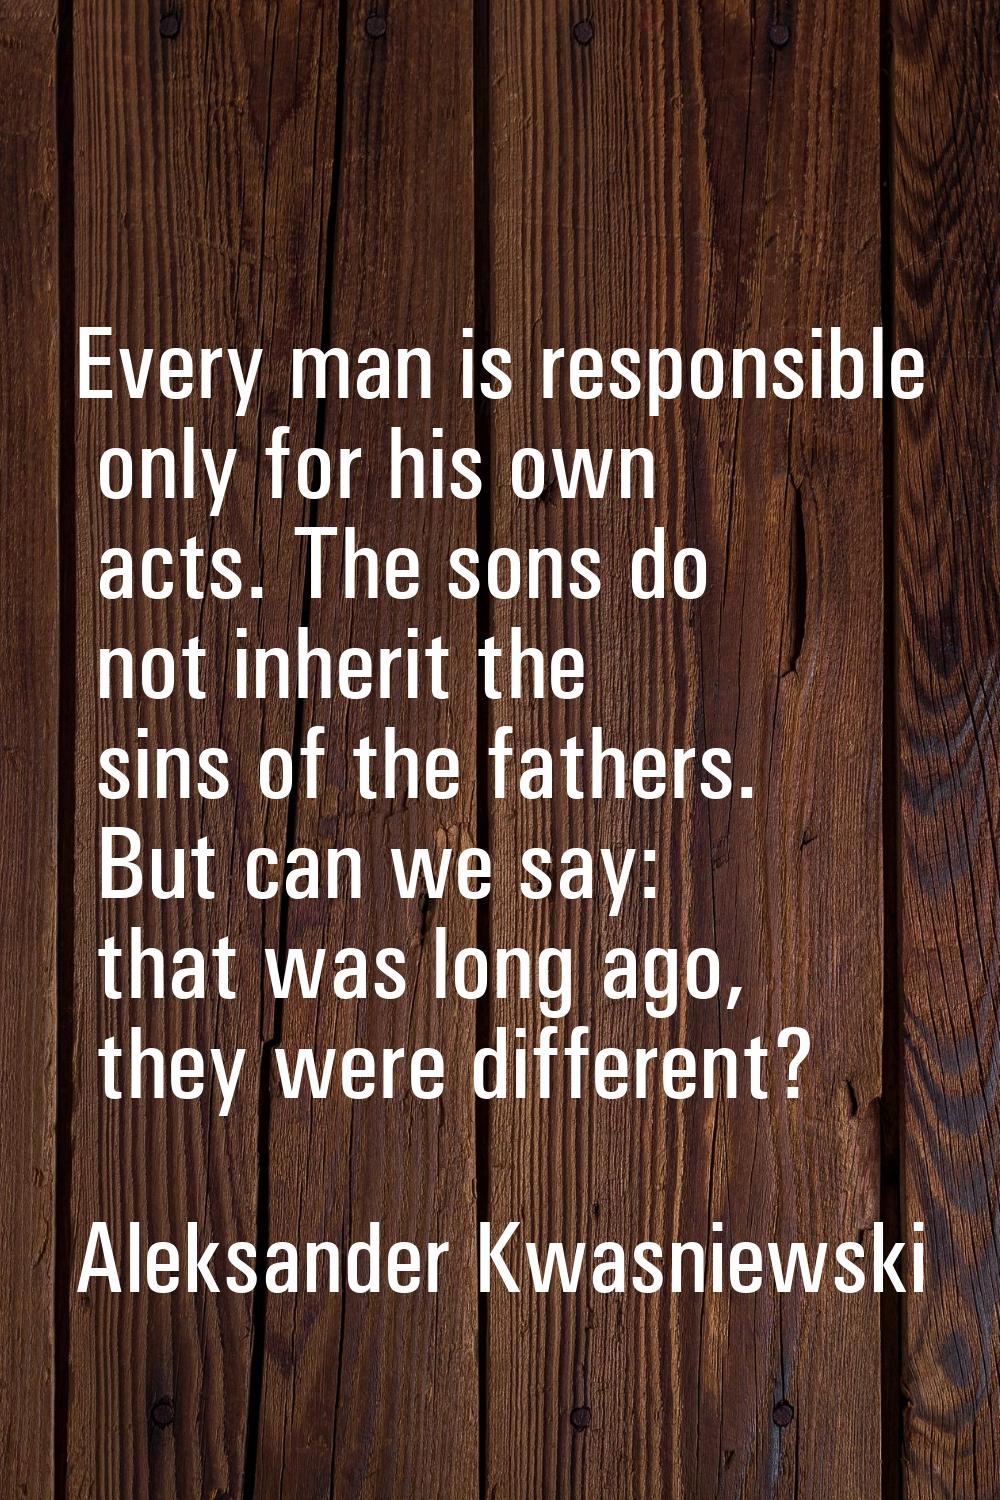 Every man is responsible only for his own acts. The sons do not inherit the sins of the fathers. Bu